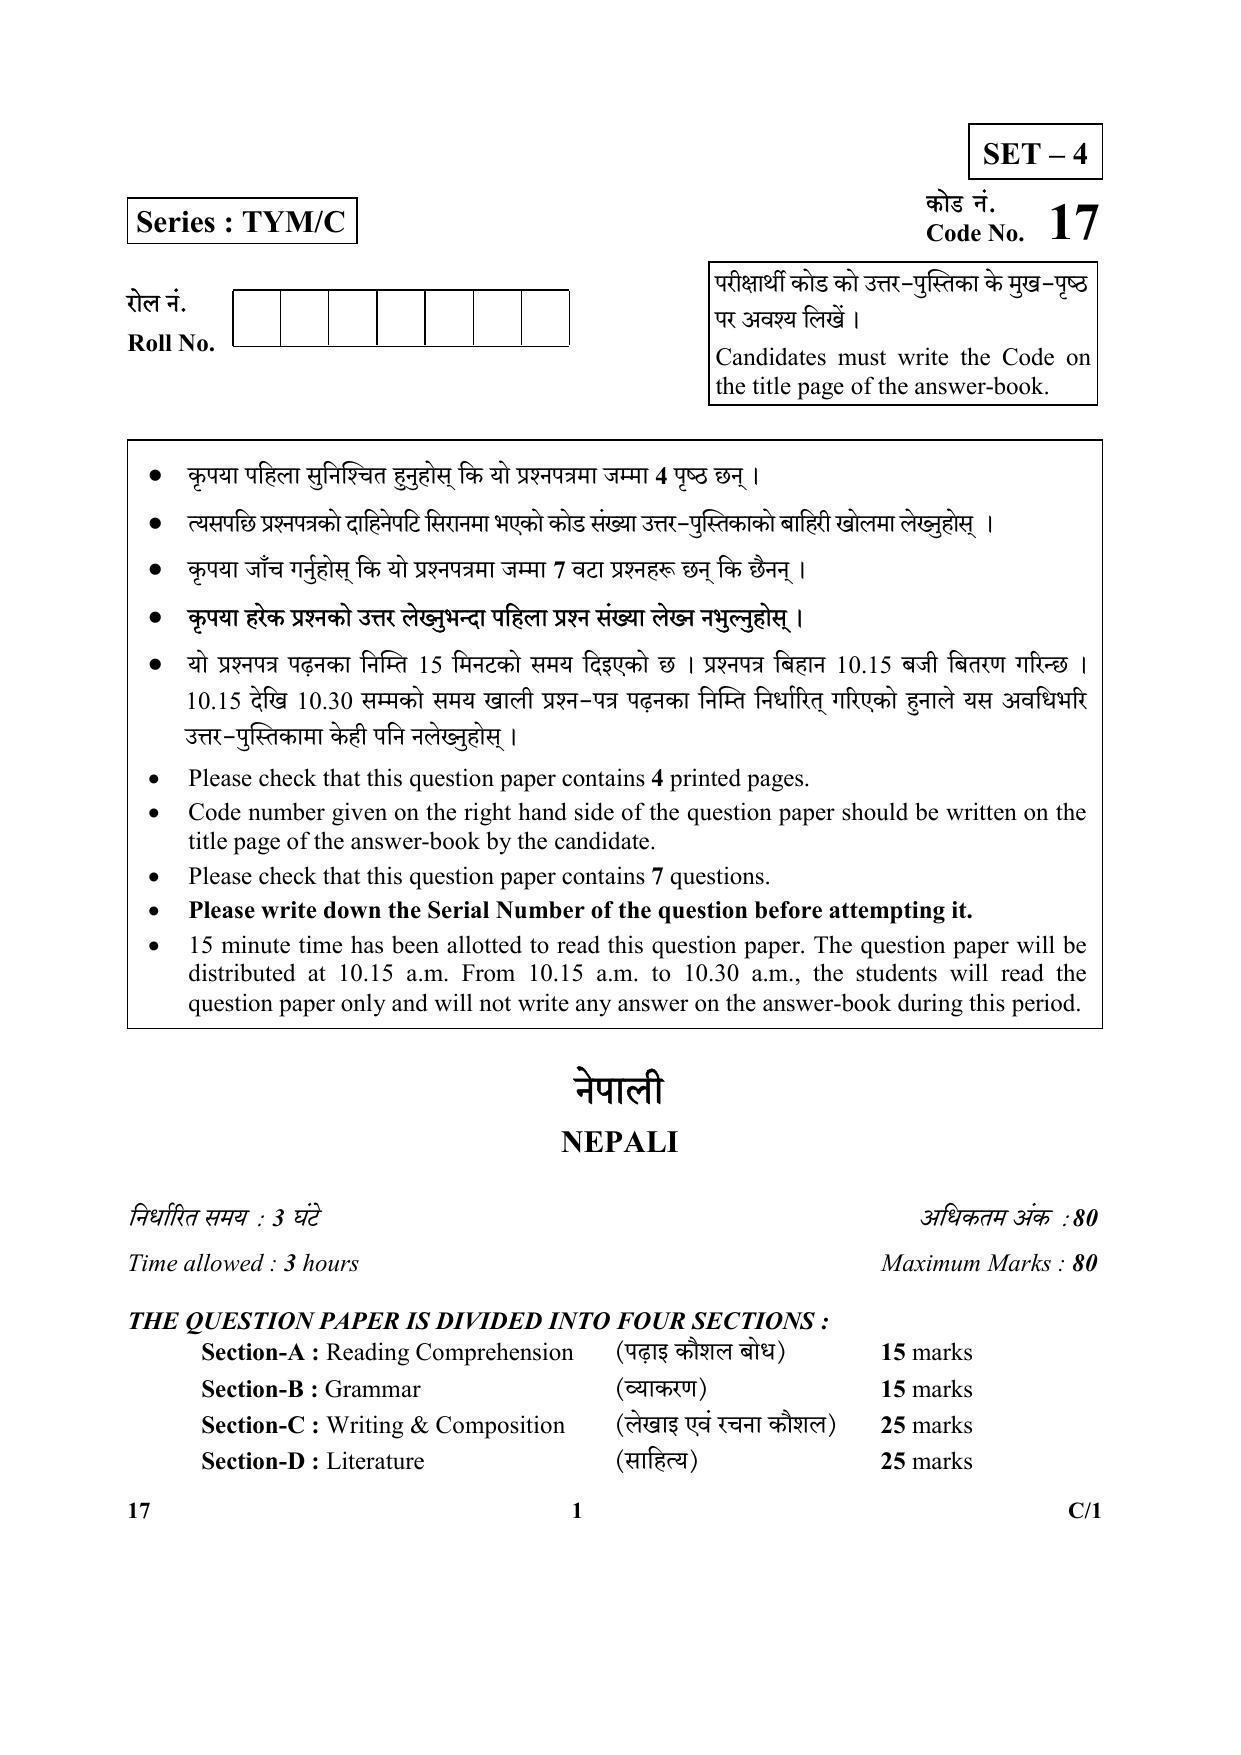 CBSE Class 10 17 (Nepali) 2018 Compartment Question Paper - Page 1